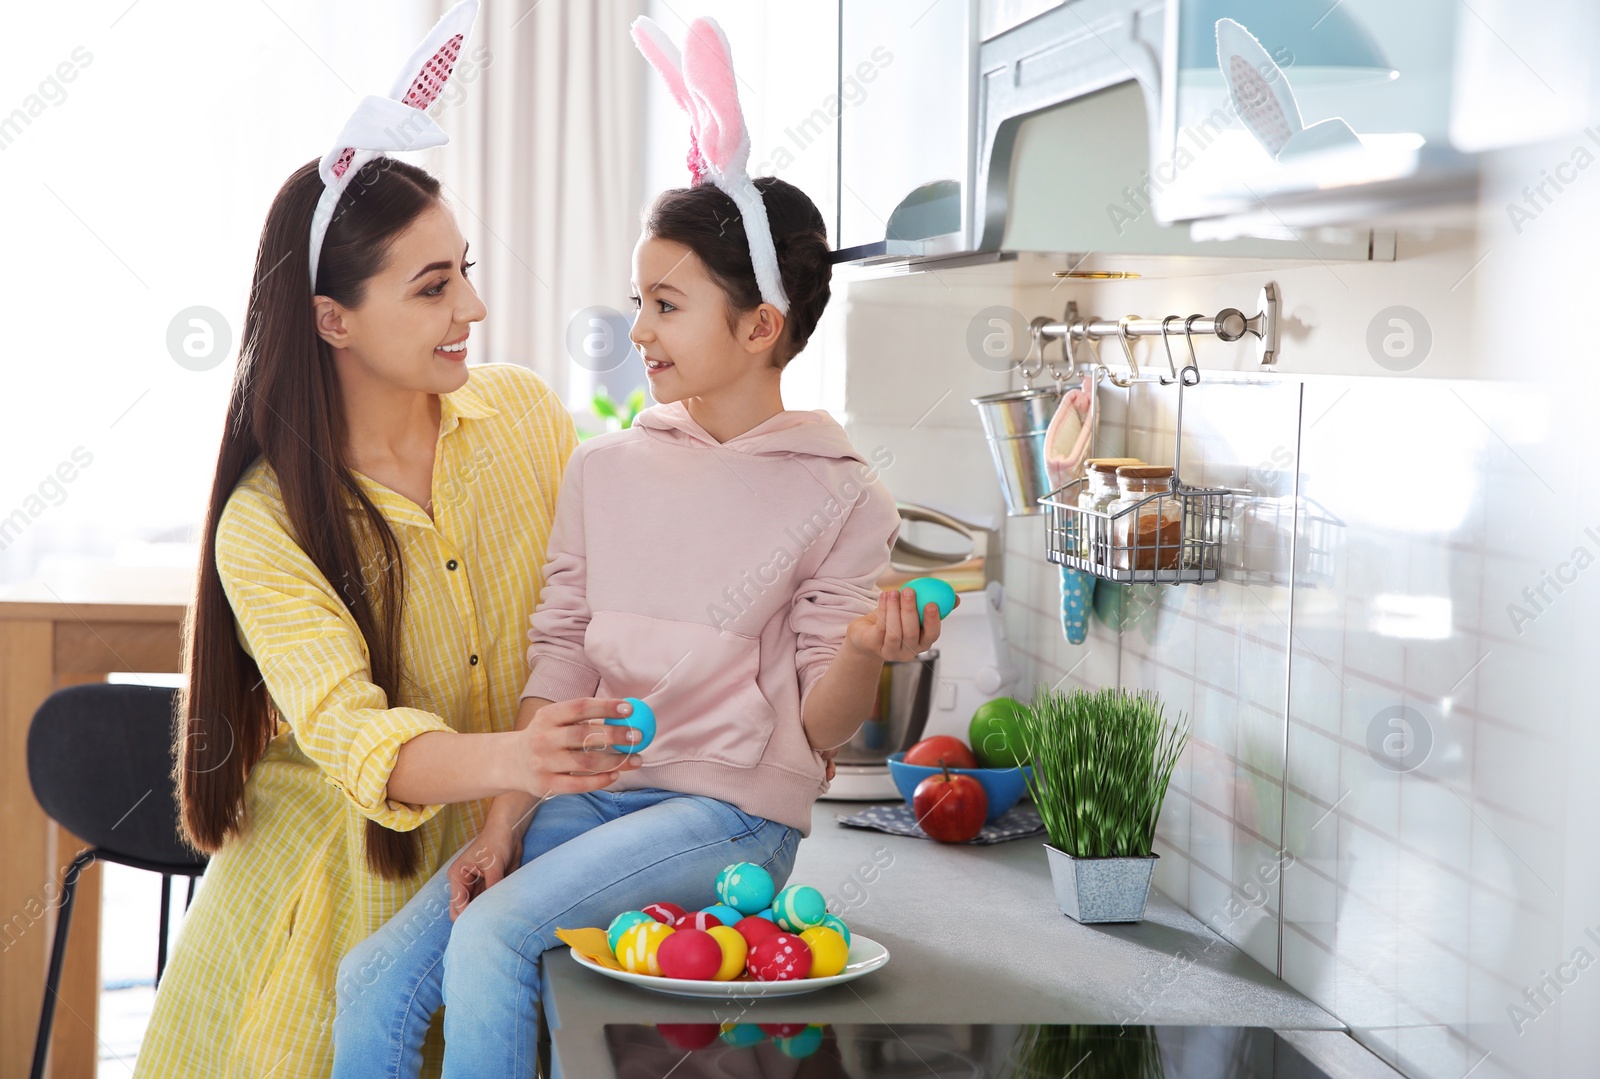 Photo of Mother and daughter with bunny ears headbands and painted Easter eggs in kitchen, space for text